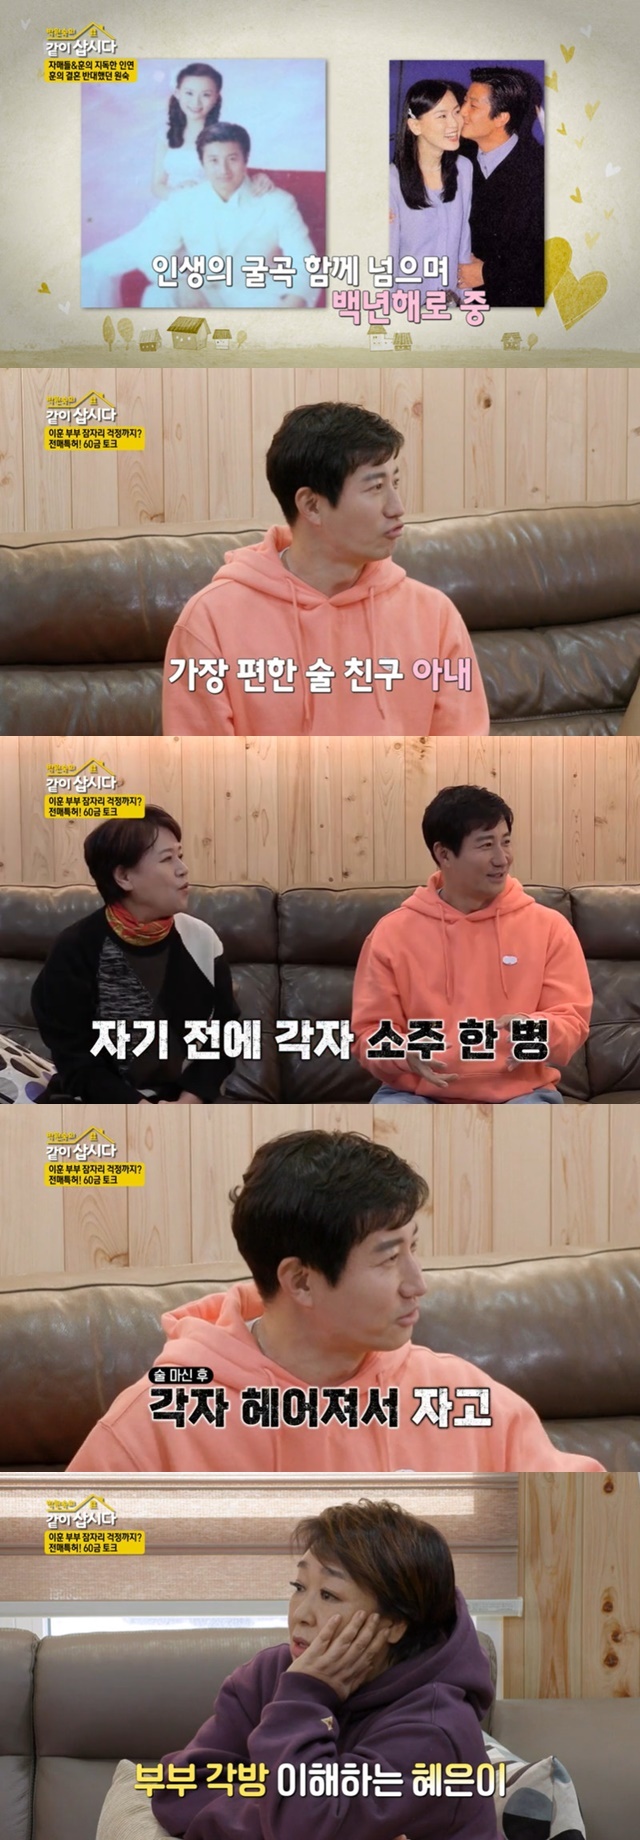 50-year-old Lee Hoon shares with wife in various rooms, Confessions saysActor Lee Hoon appeared as a worker on KBS 2TV Saw the Season 3 which was broadcast on April 19th.On the day of the show, Lee Hoon said, I was 27 when I was marriage. I first saw my wife in the first year of junior high school.I was married after eight years of dating and my first love, he said.When Kim Chung asked, Do you think youre still in a relationship? Lee Hoon said, Youre the most comfortable drinker now. You drink one bottle of each soju before you go to bed.Im a high school student, so Im going to talk about my big boy going to the army, going to the army, and going to sleep after drinking a bottle of it.Hye Eun agreed that there are many couples who use a room separately when they are in their 50s, and Lee Hoon said, There is the biggest reason.When theyre sleeping and theyre trying to sleep with their mother, they sleep on the couch, and theyre uncomfortable with each other even if they sleep separately.